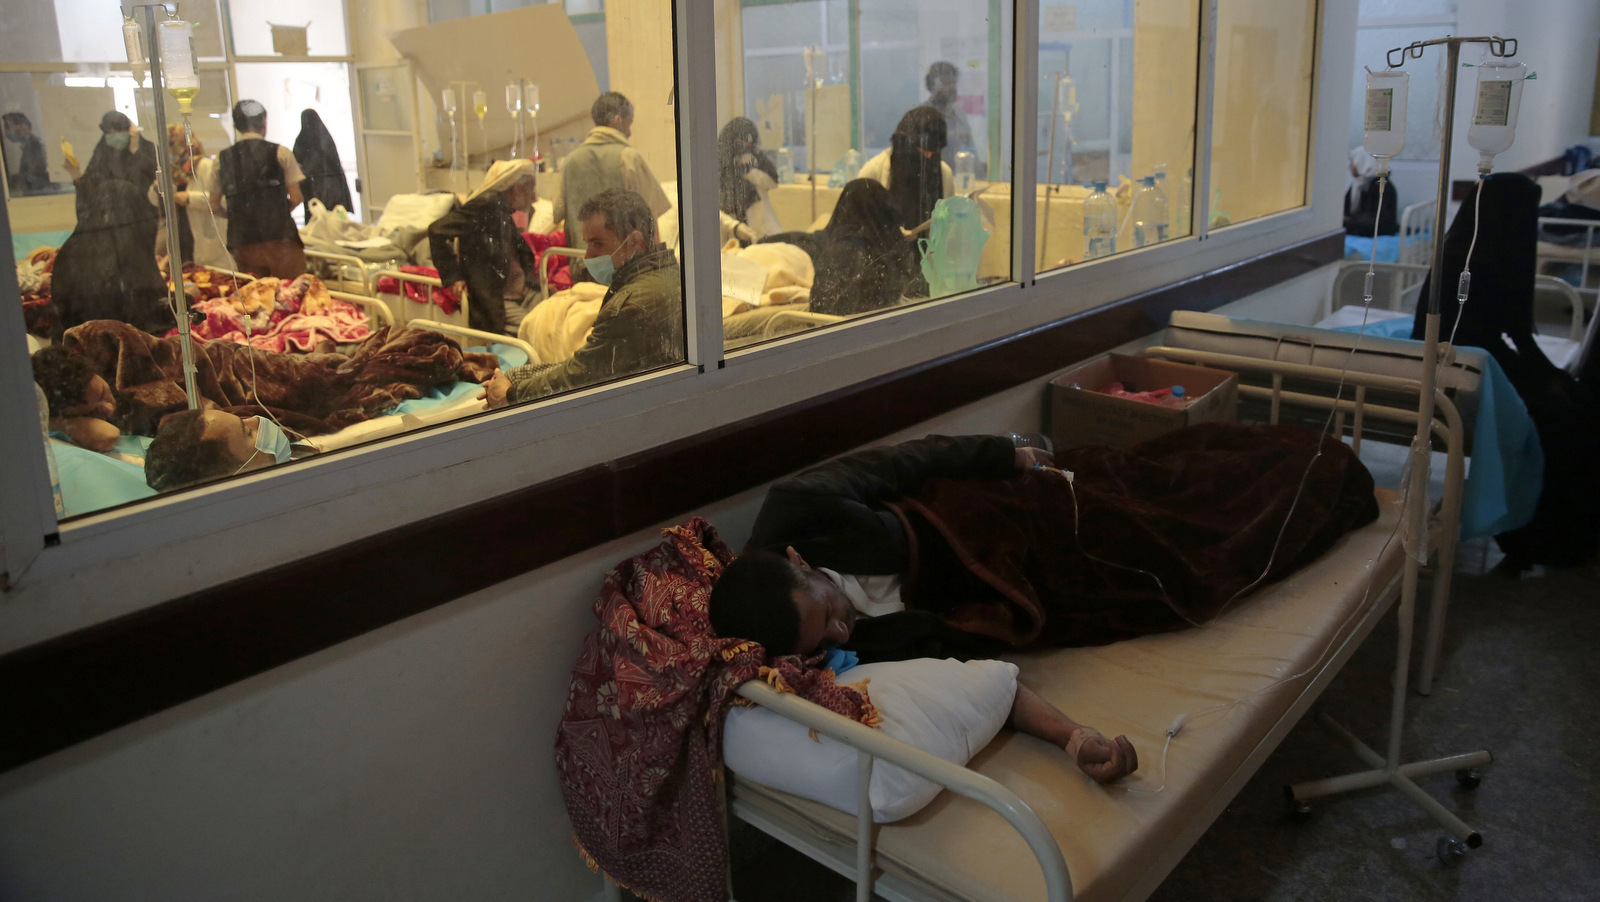 People are treated for suspected cholera infection at a hospital in Sanaa, Yemen, May. 15, 2017. While cholera is easily treated, the Saudis’ ongoing blockade has crippled Yemen’s health system, making it unable to respond to the crisis.(AP/Hani Mohammed)